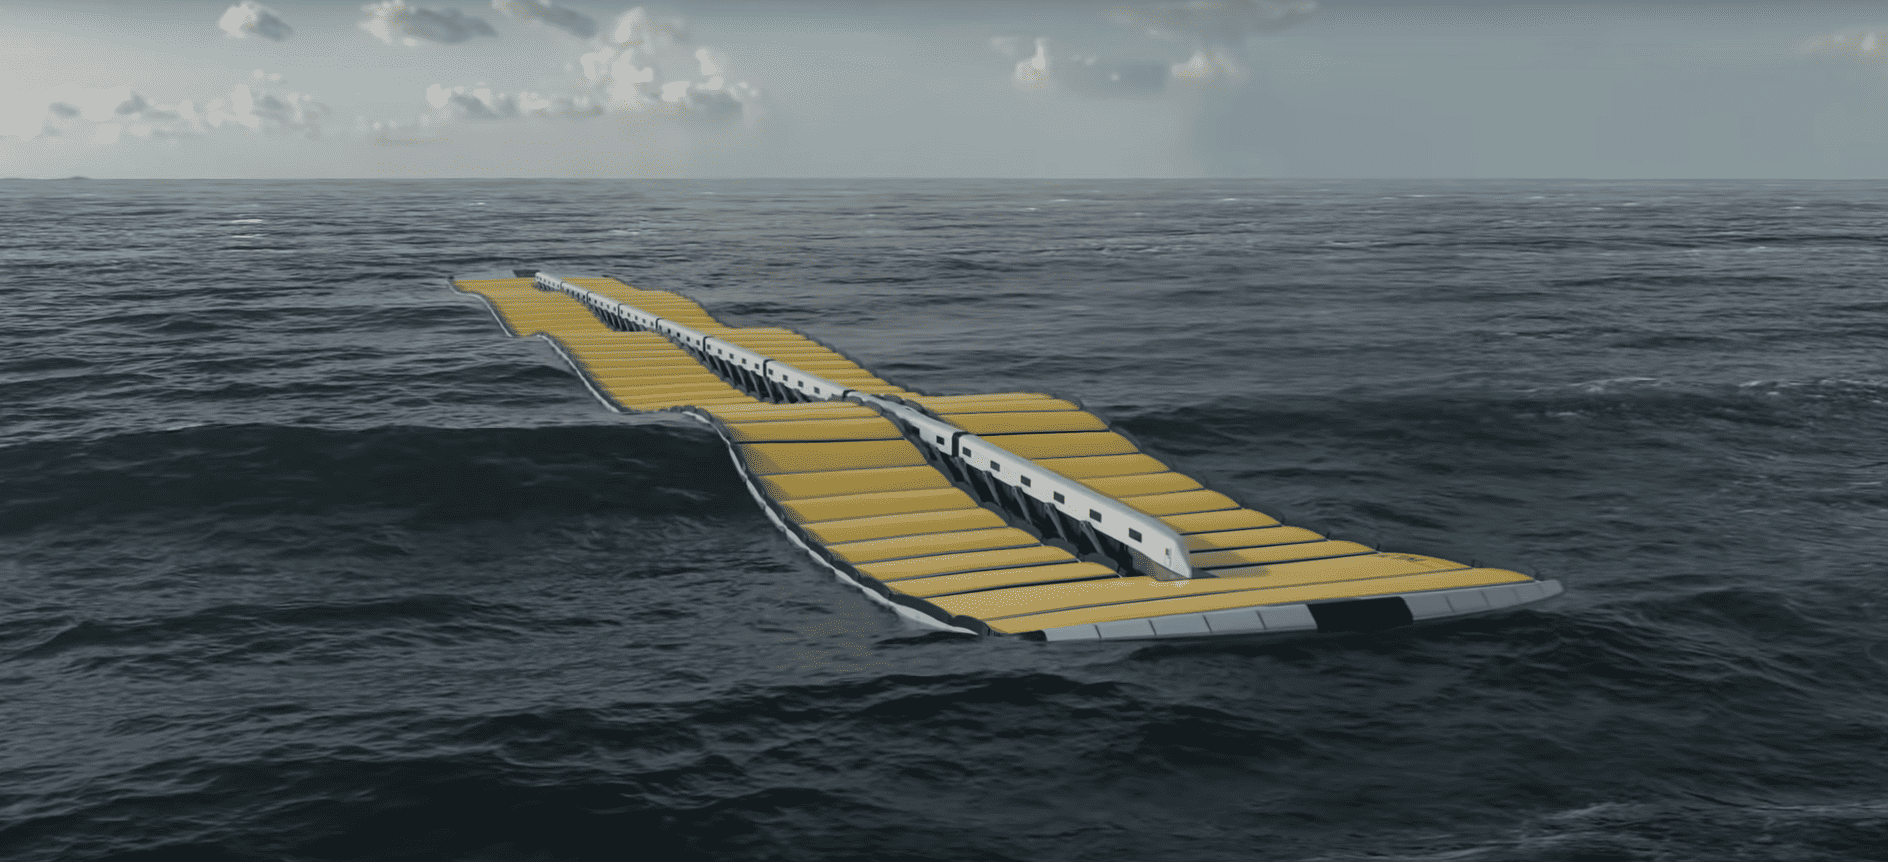 This technology breaks the enigma of wave energy